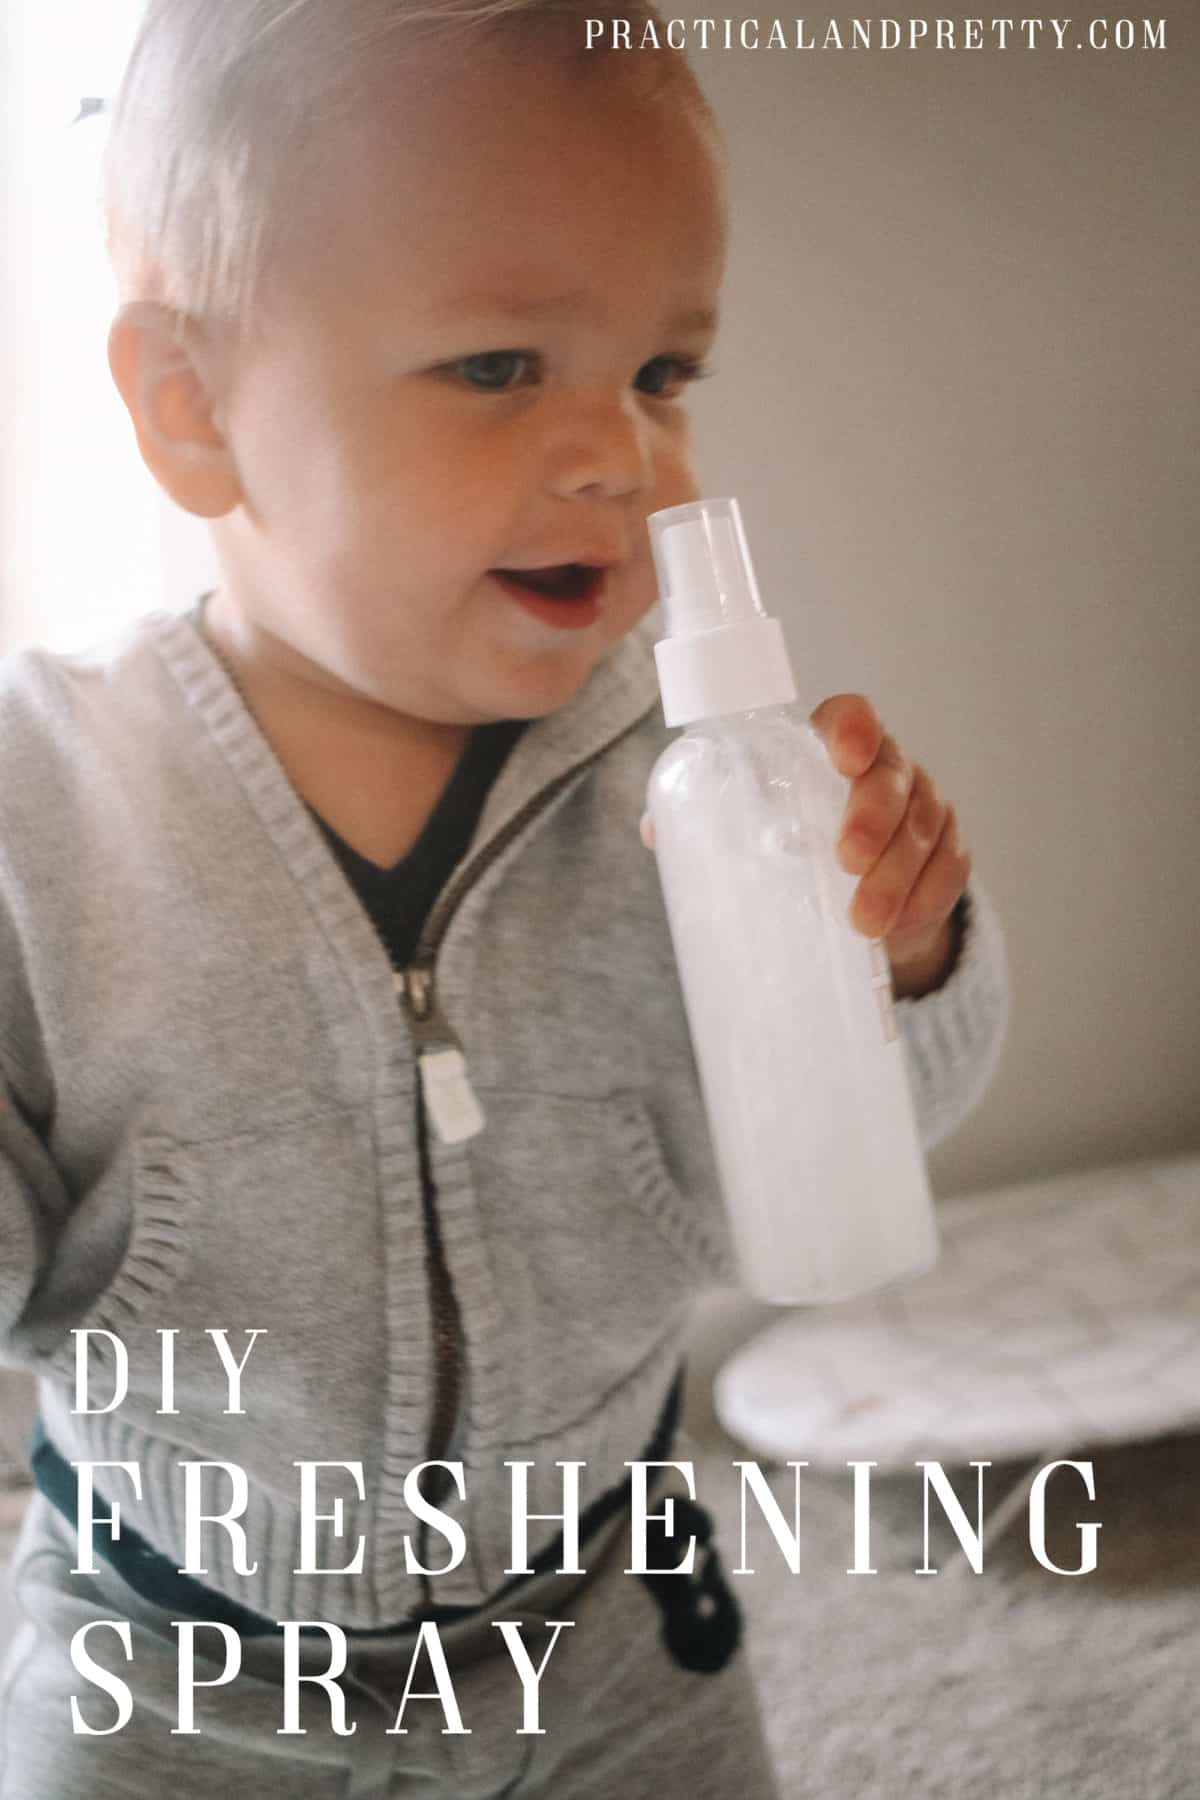 This simple DIY for a freshening spray is perfect for using on you or your child when you feel you need a little mist of refreshing scent. 